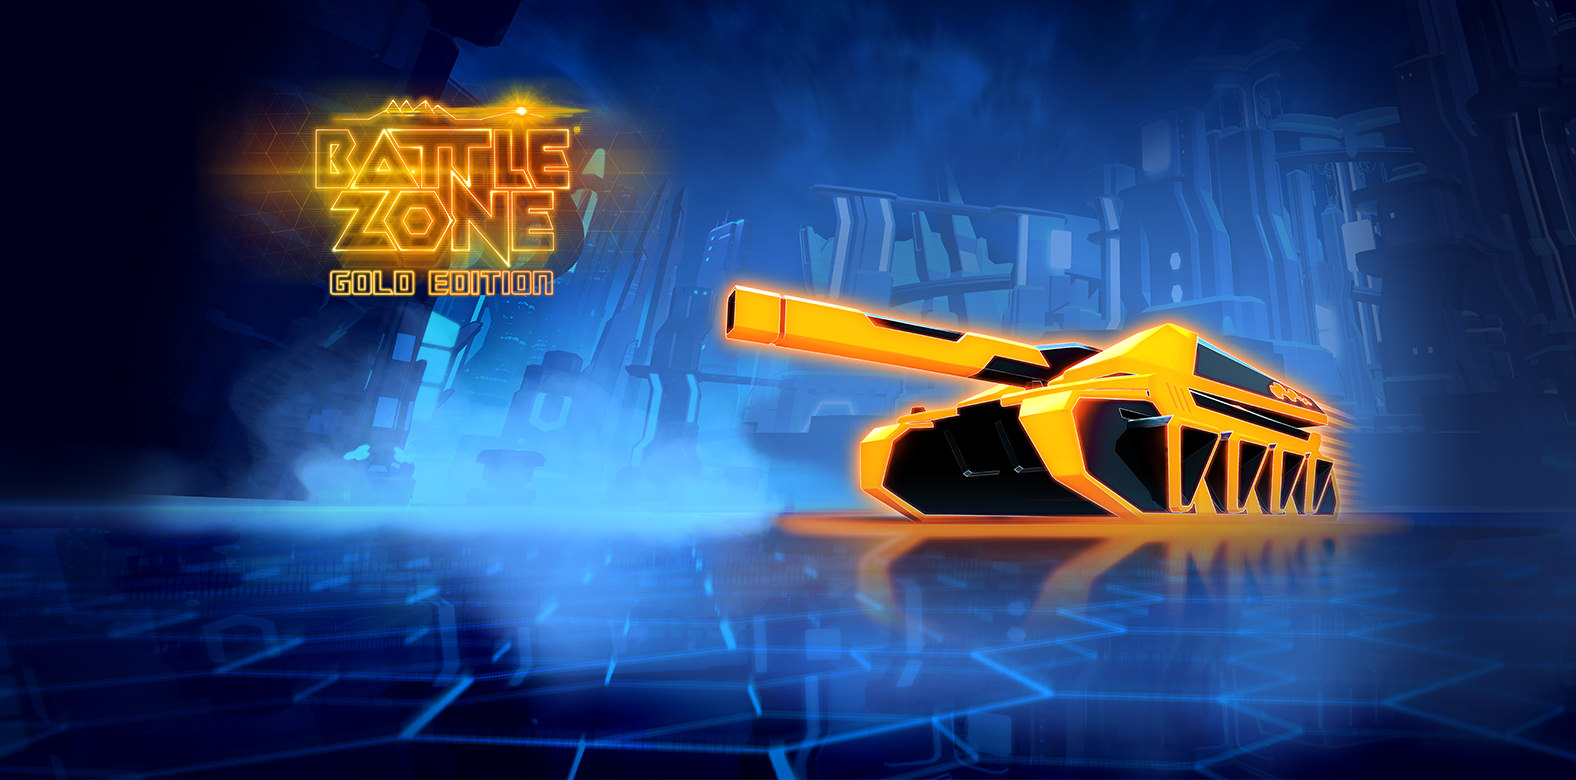 battlezone gold edition ps4